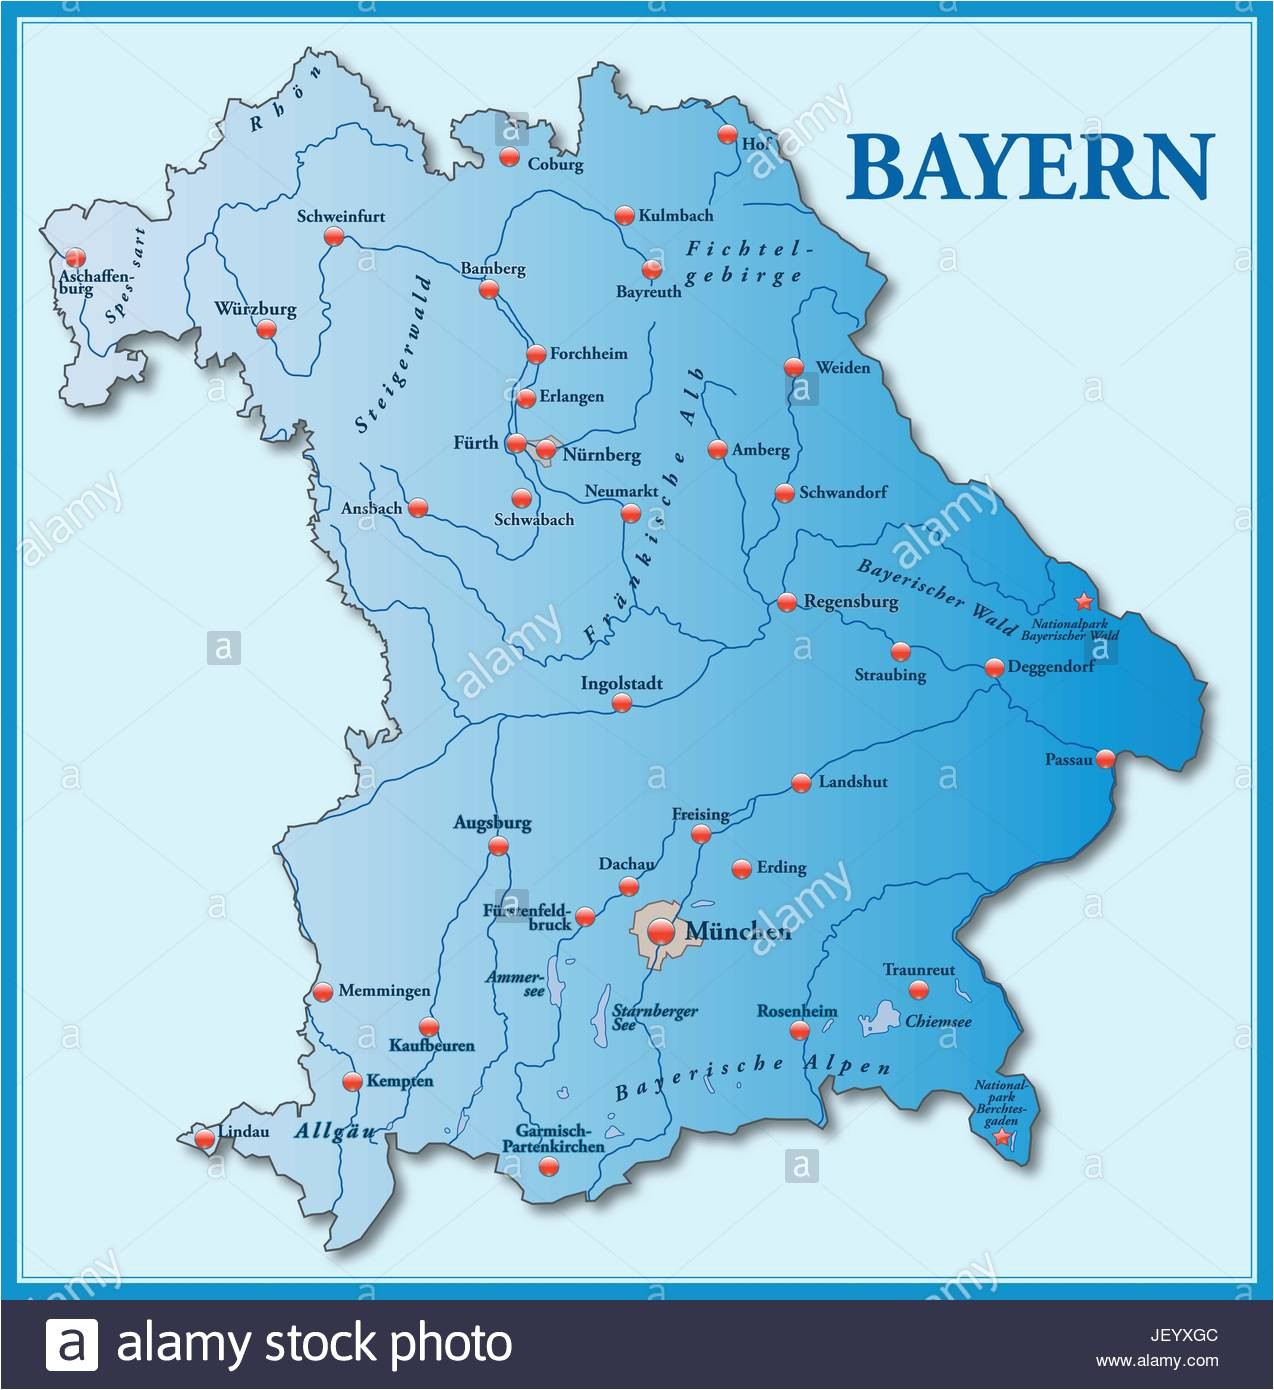 card atlas map of the world map bavaria card state atlas map of the jeyxgc jpg